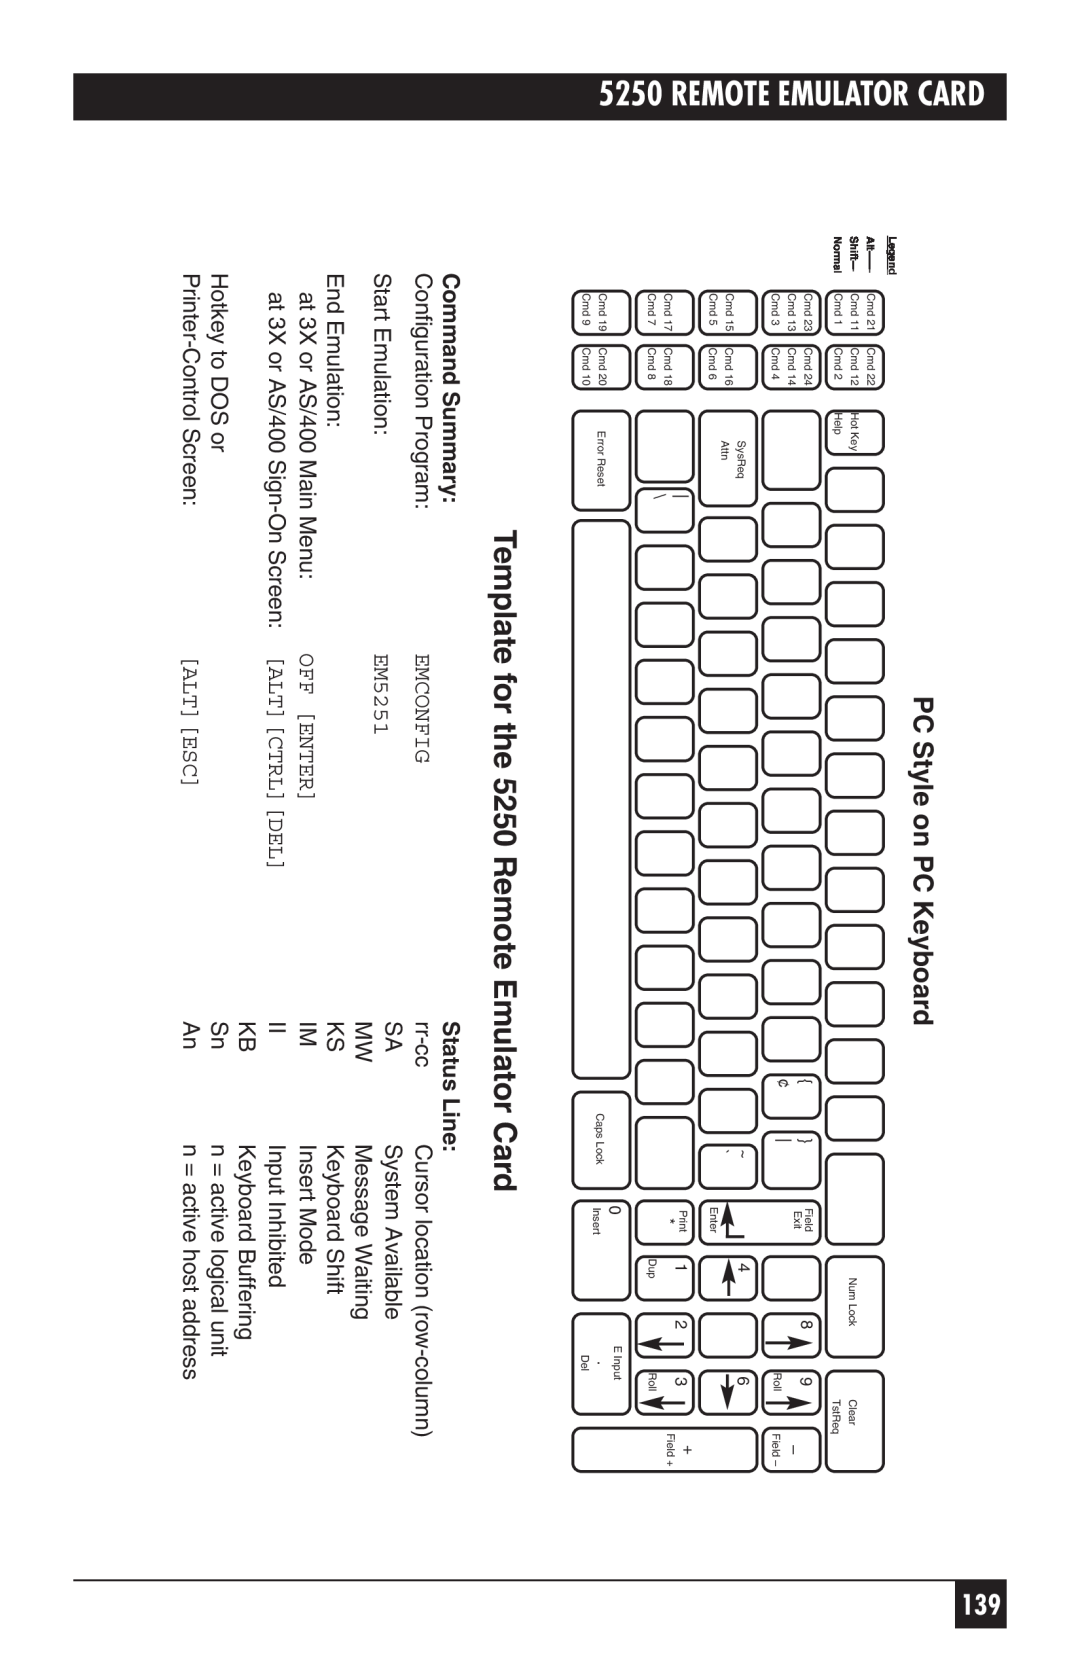 Black Box Template for the 5250 Remote Emulator Card, PC Style onPC PCKeyboardKeyboard, Command Summary, Status Line 